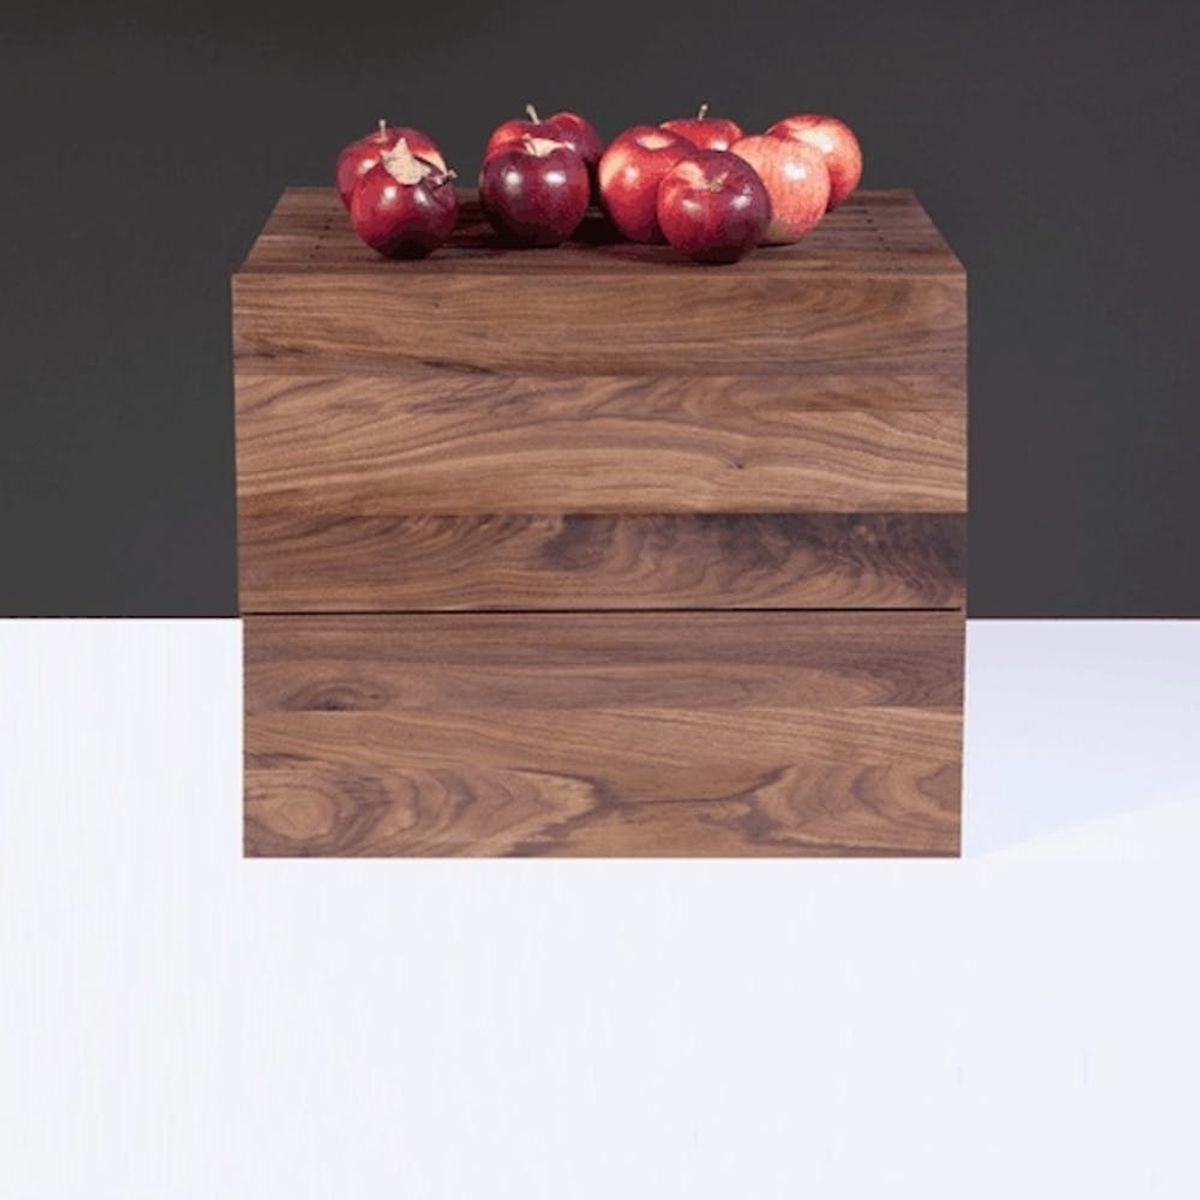 This Sleek Storage System Keeps Fruit Fresh With No Electricity